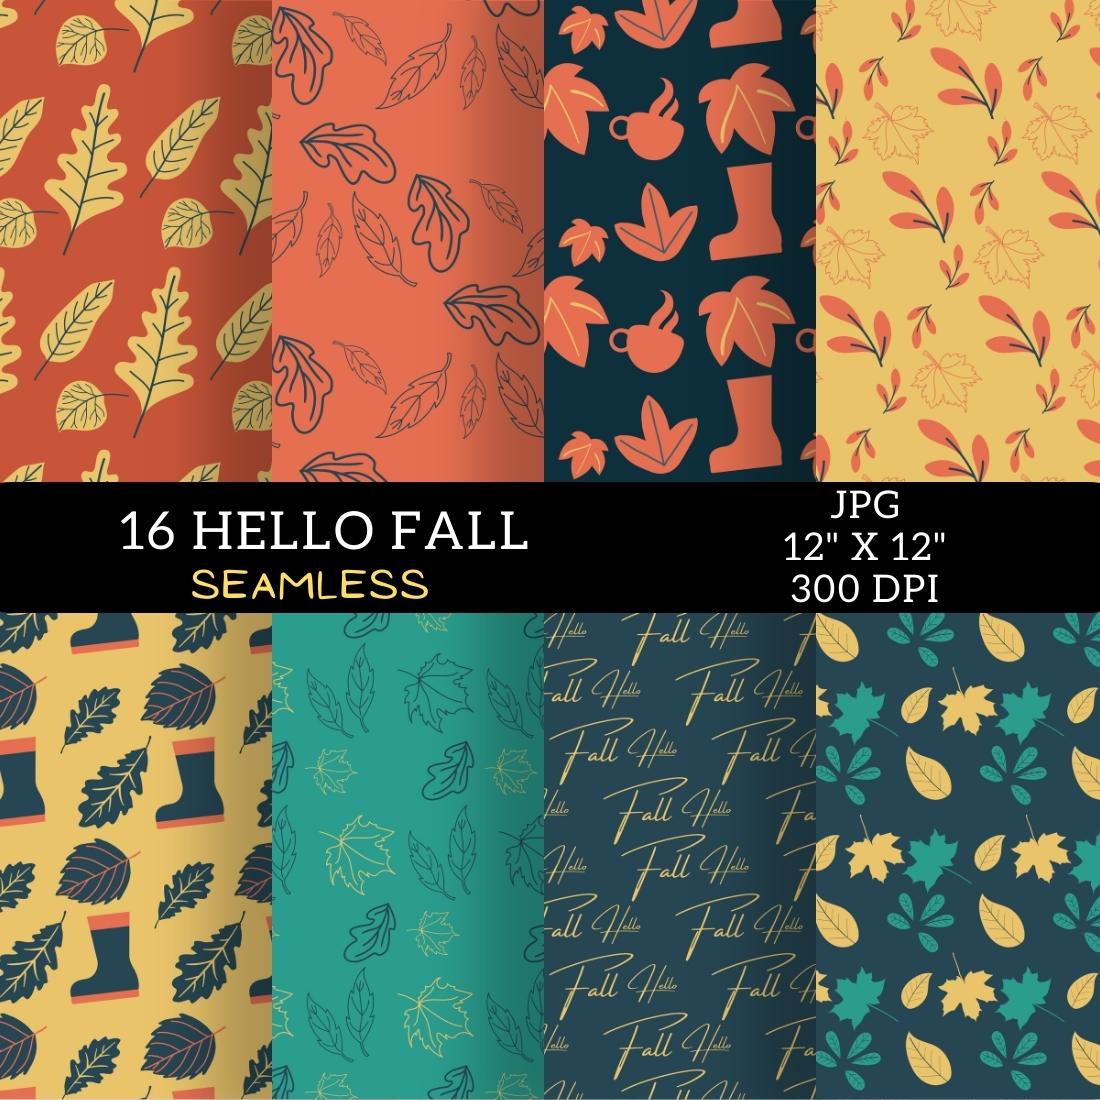 A pack of amazing autumn themed background patterns.